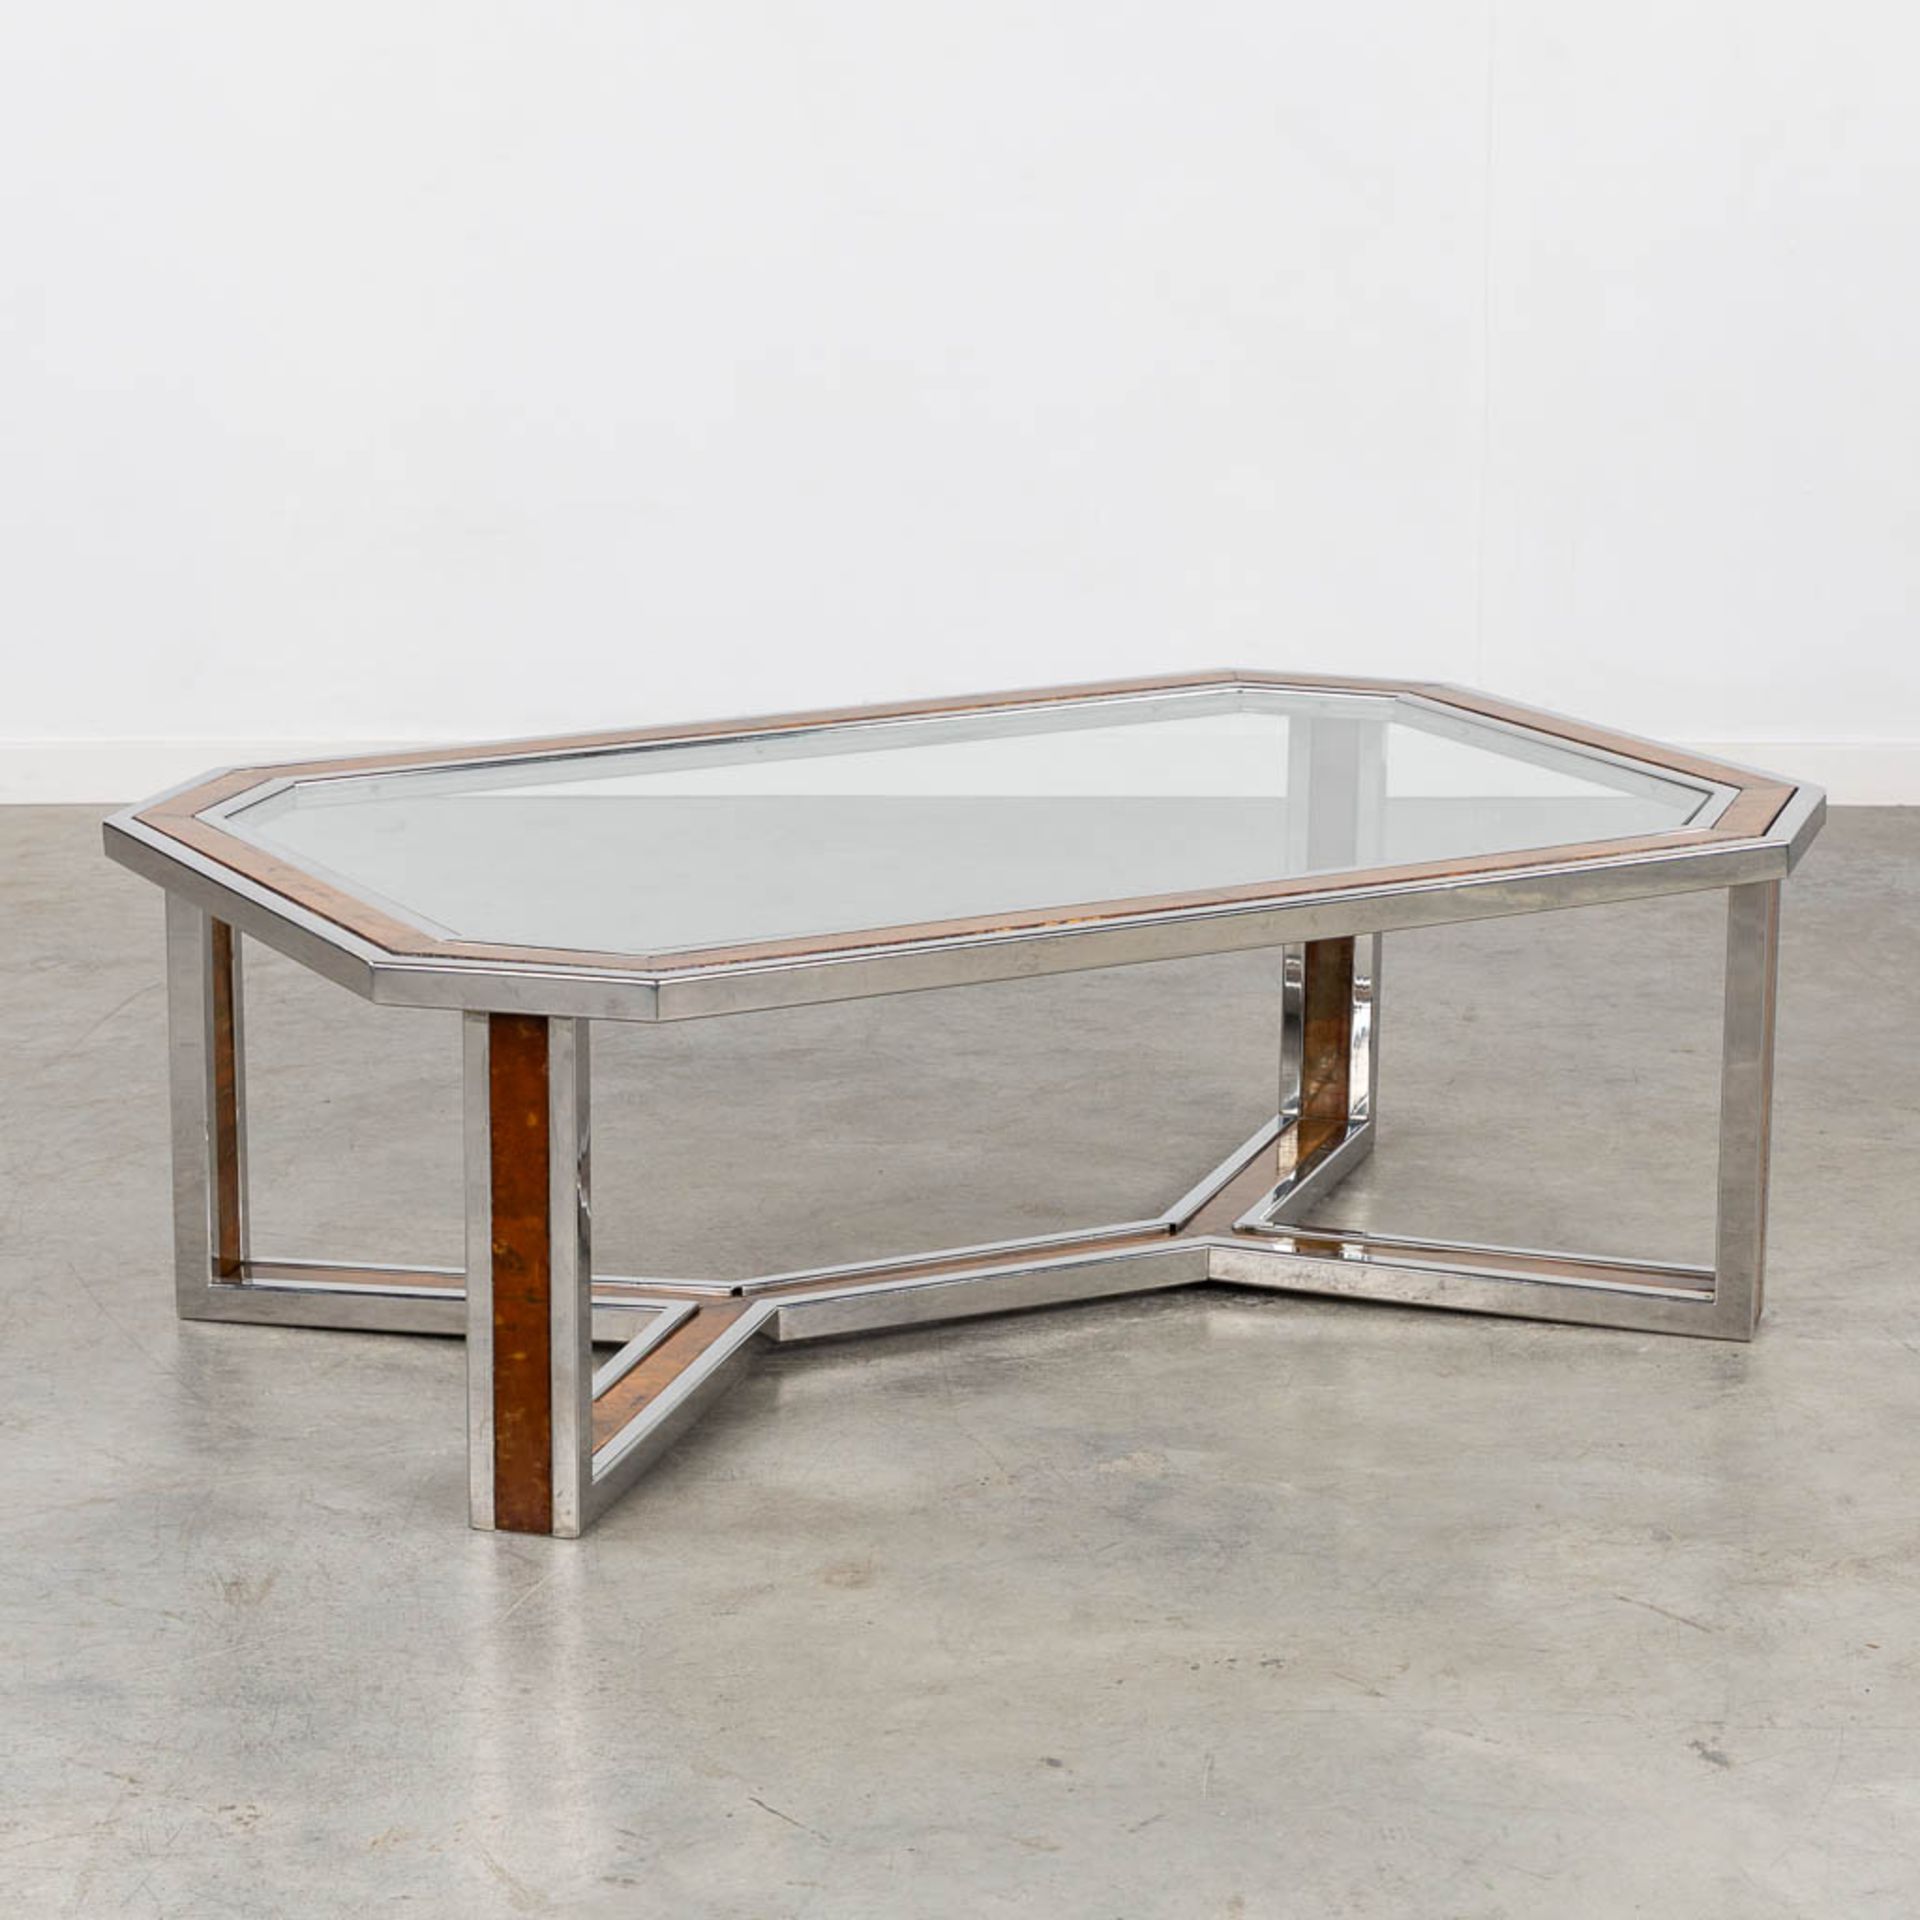 A coffee table, chrome with a faux wood inlay and a glass top. (L:80 x W:120 x H:40 cm)